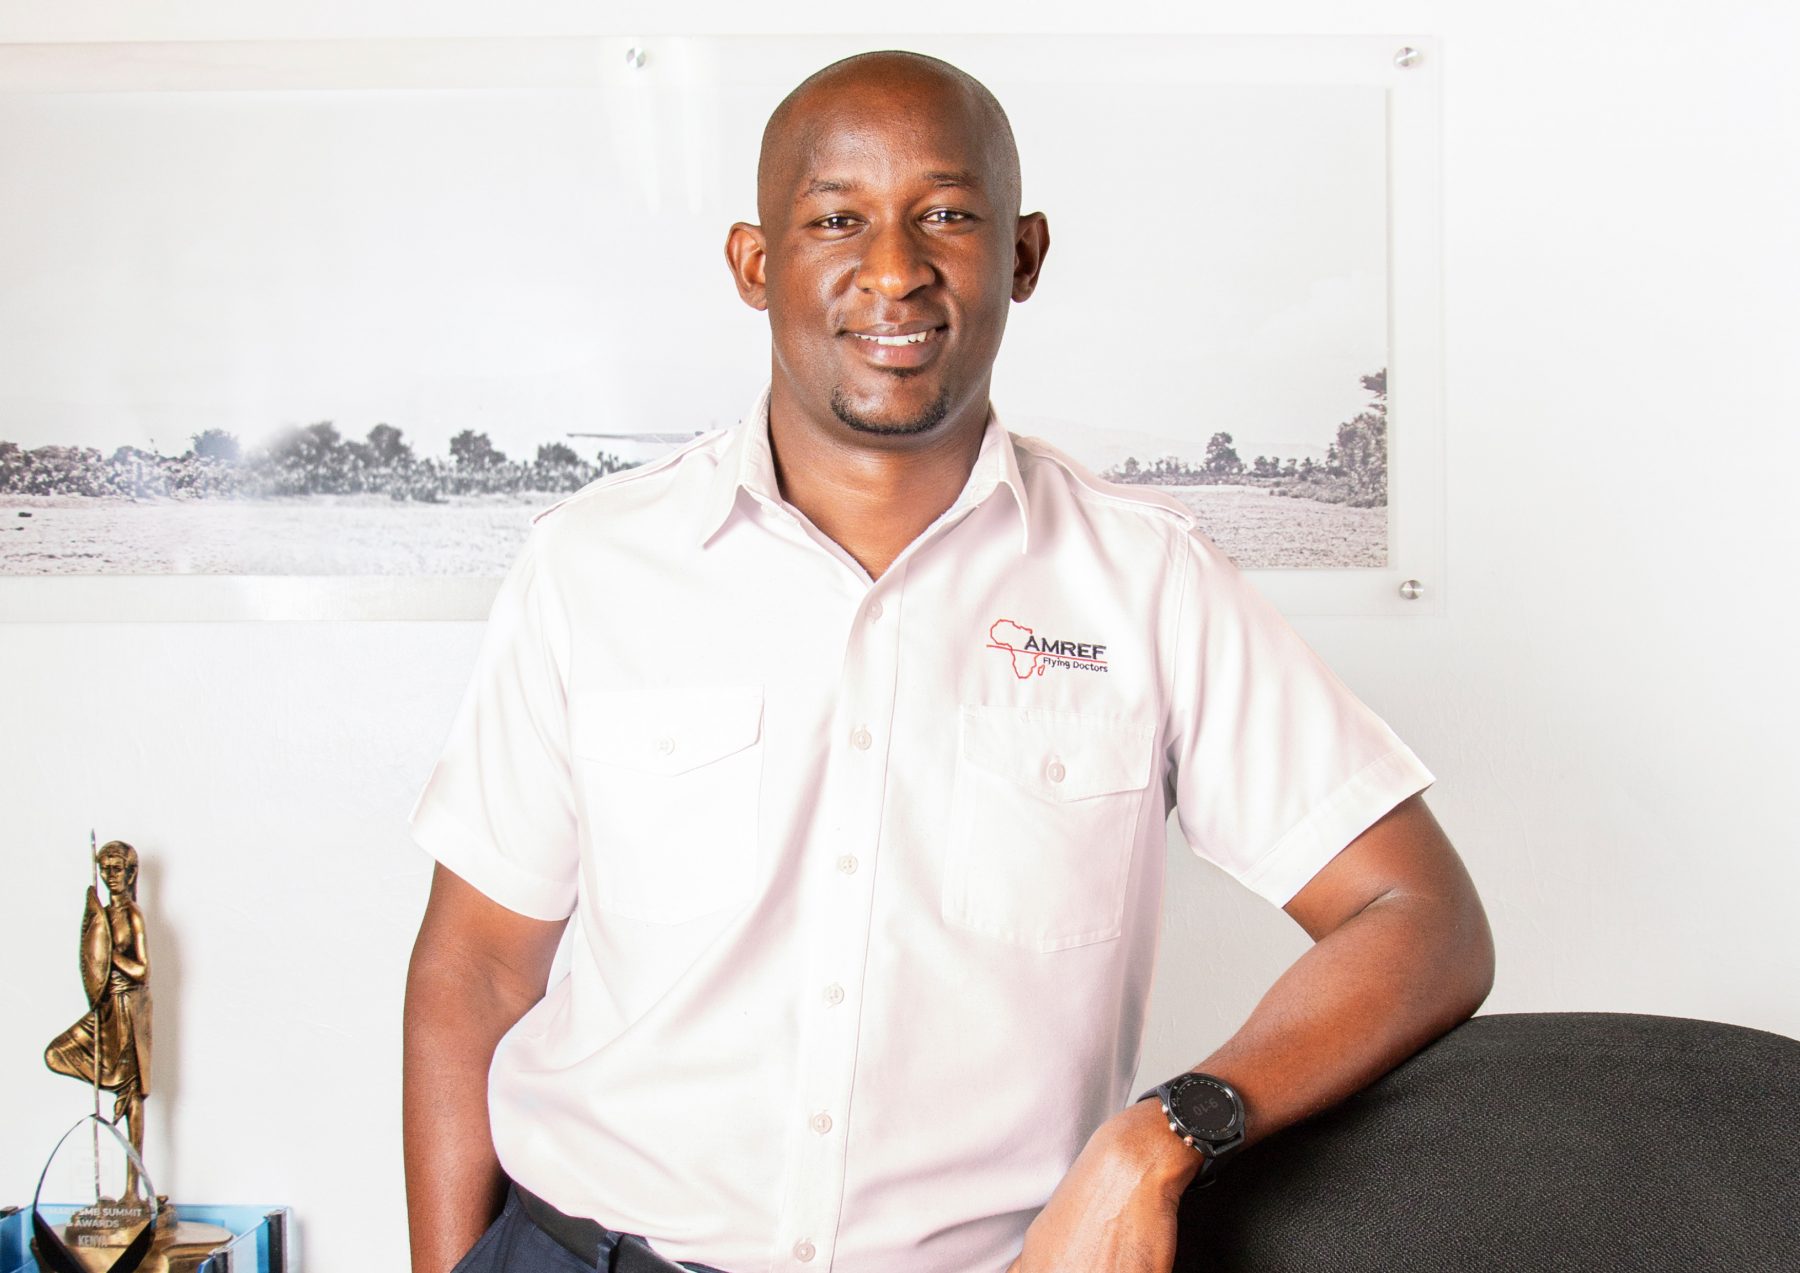 Stephen Gitau, the Chief Executive Officer for AMREF Flying Doctors